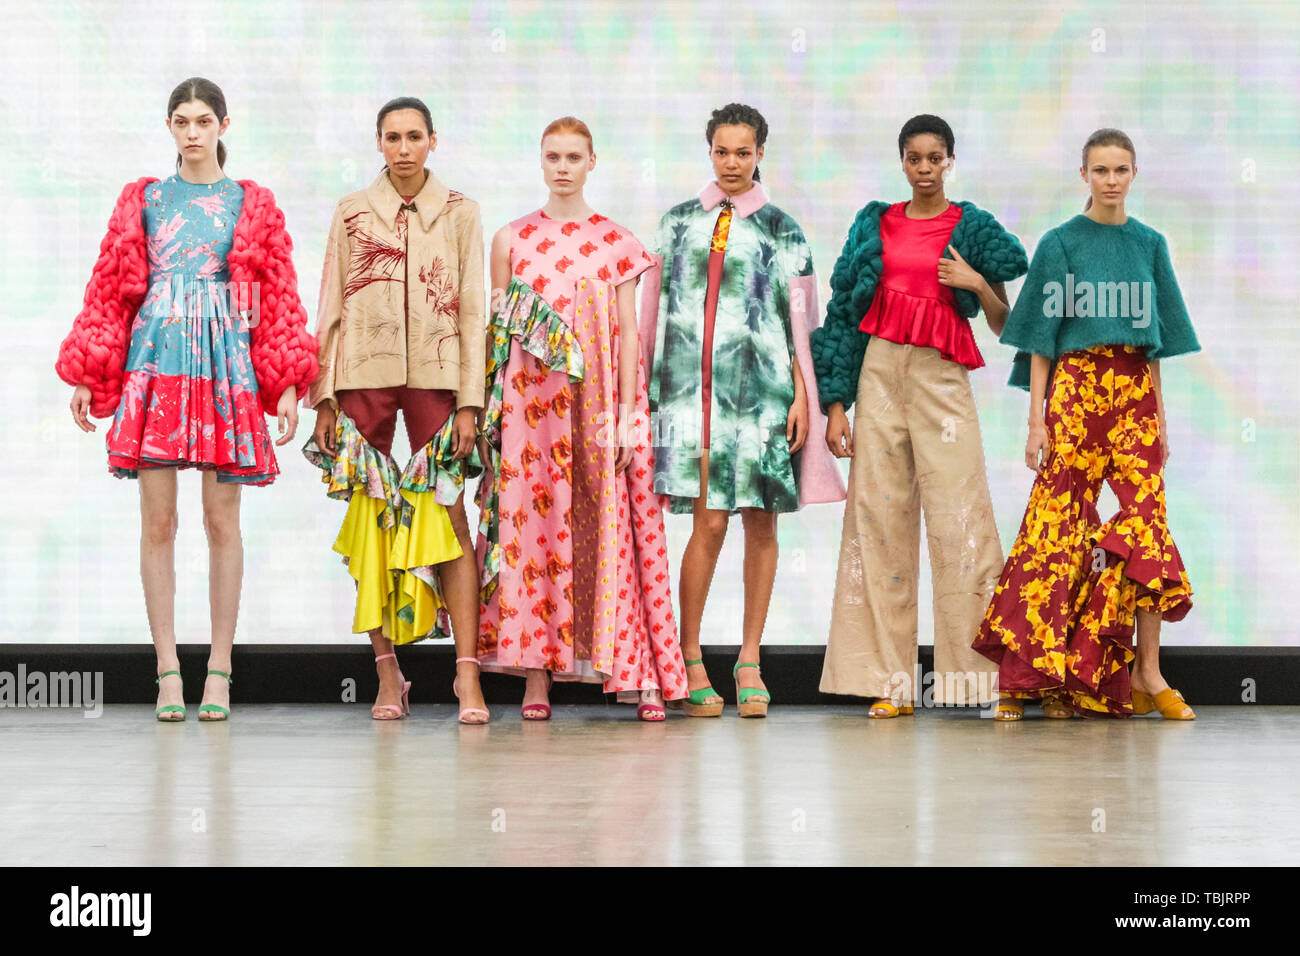 London, UK, 02 June 2019.  Models on the runway in designs by Kirsty Taylor, Greater Brighton Metropolitan College.   Graduate Fashion week is held at the Old Truman Brewery, and a showcase and springboard for new talent from British fashion schools to the international fashion industry. Stock Photo